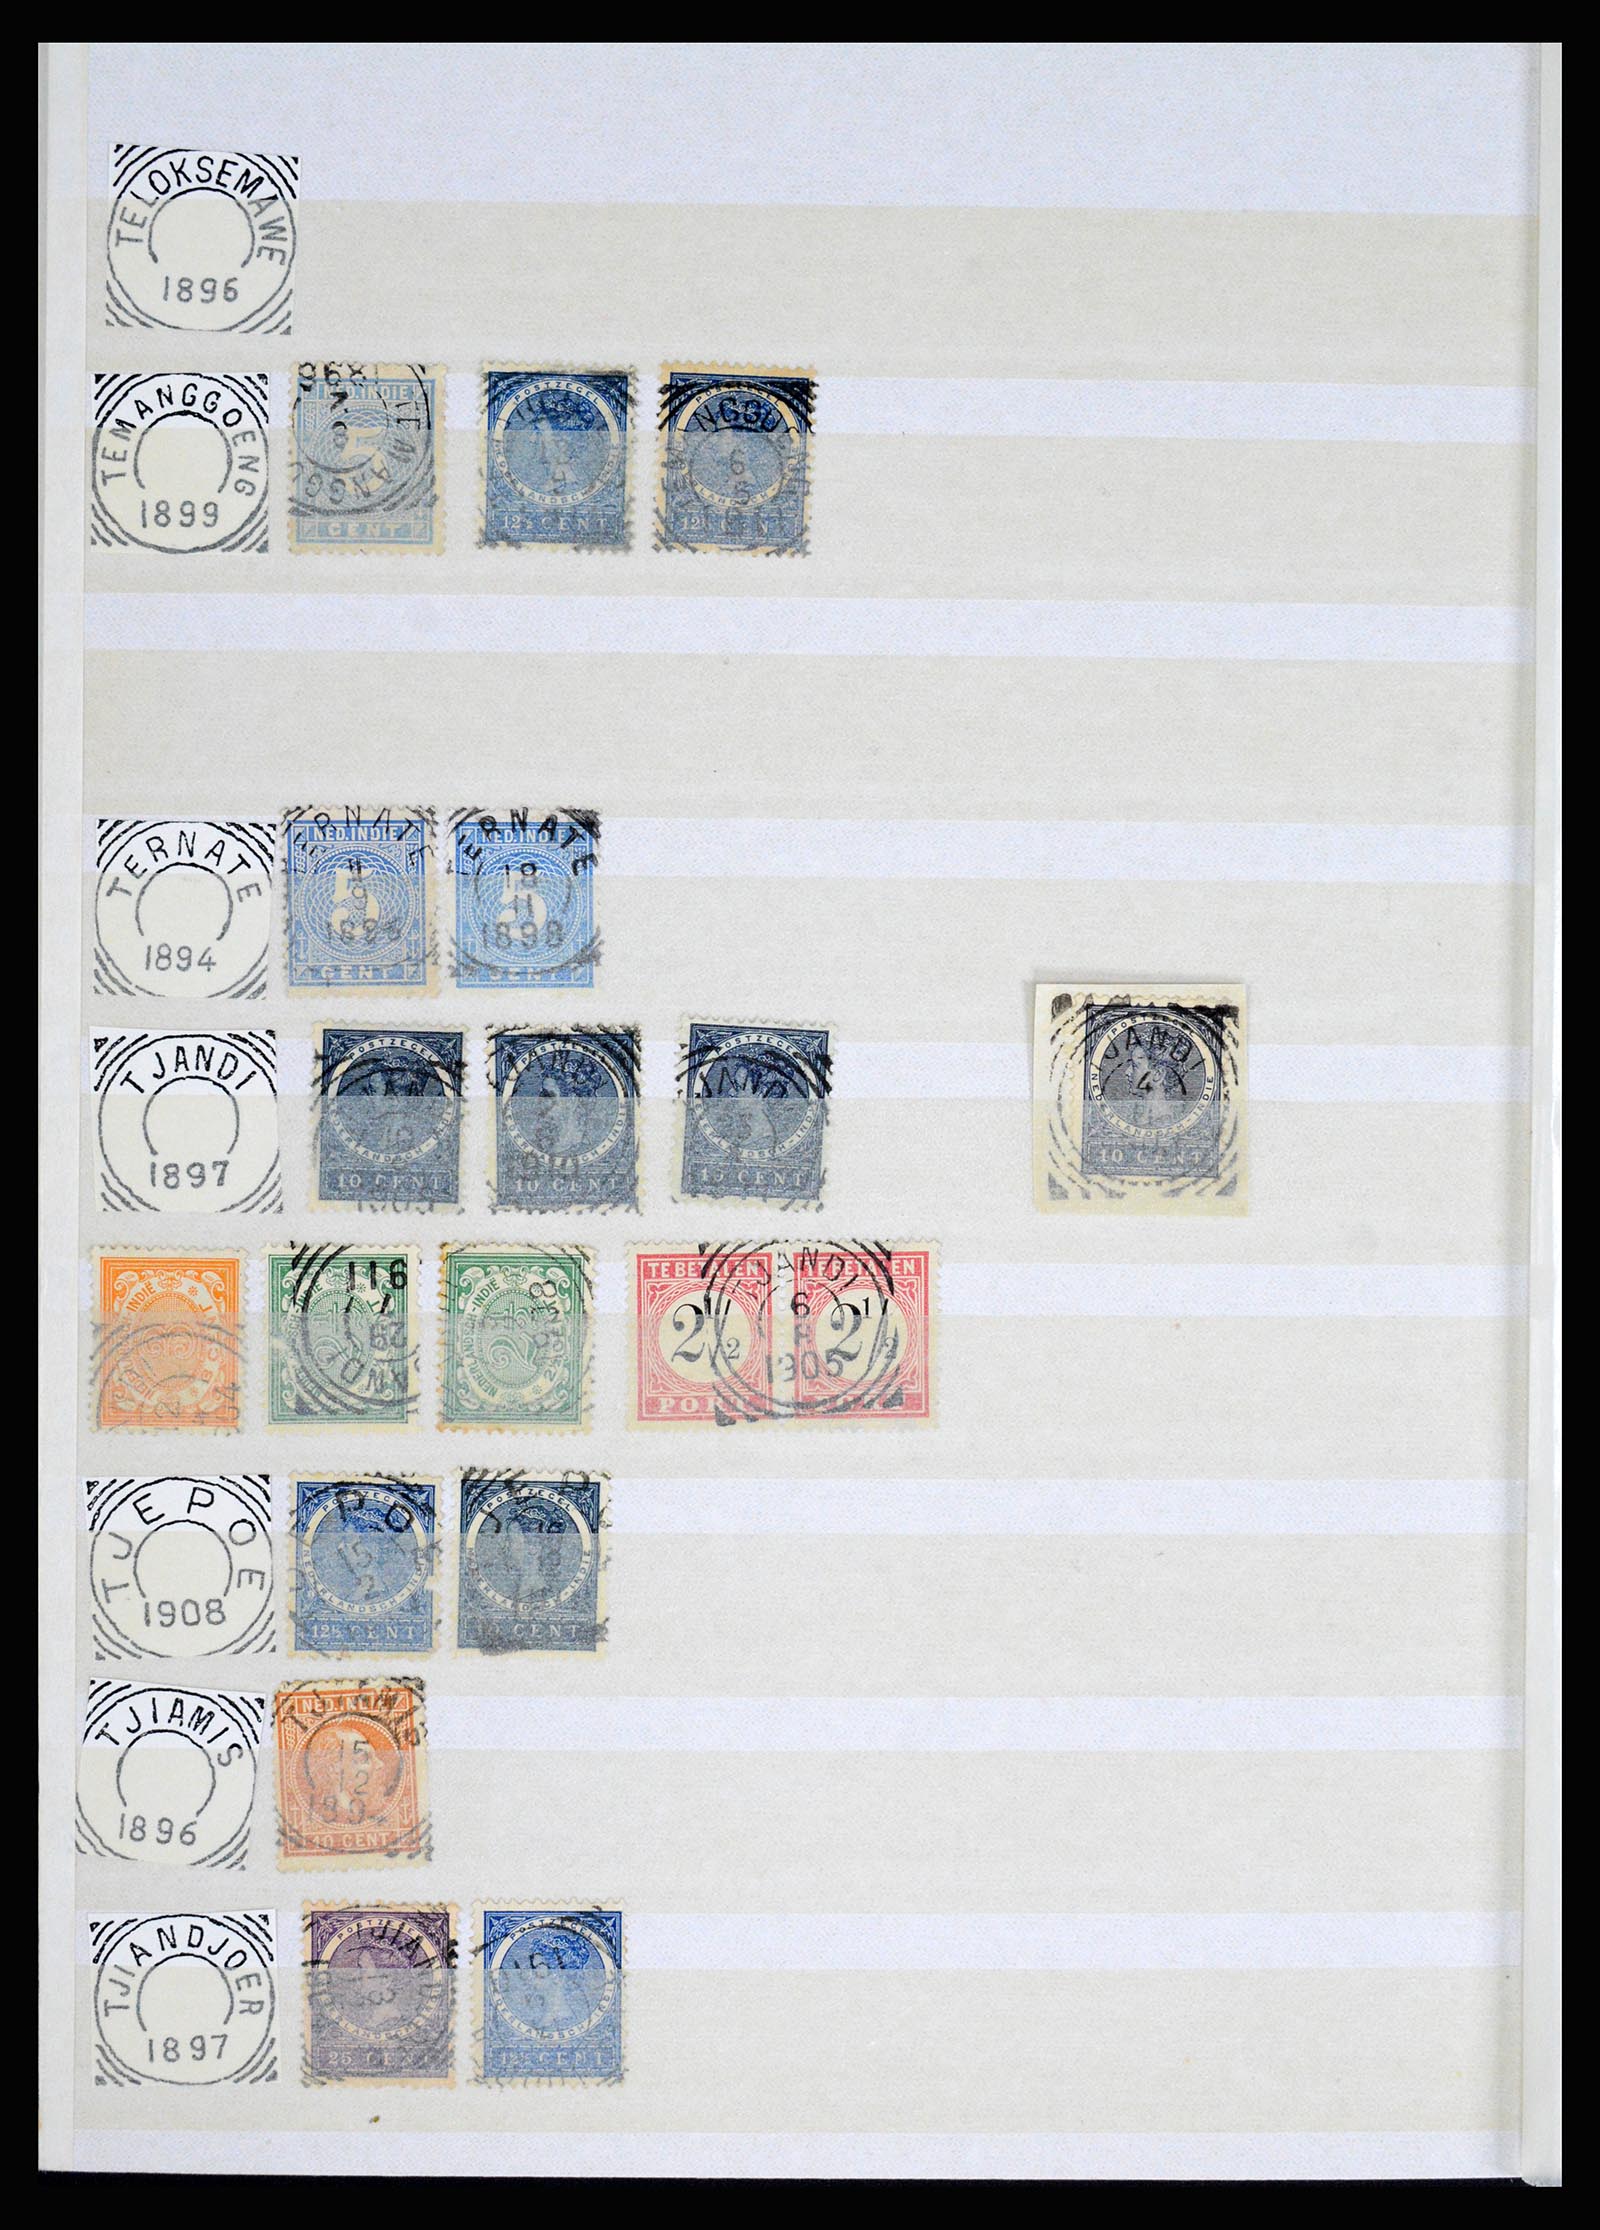 36839 097 - Stamp collection 36839 Dutch east Indies square cancels.